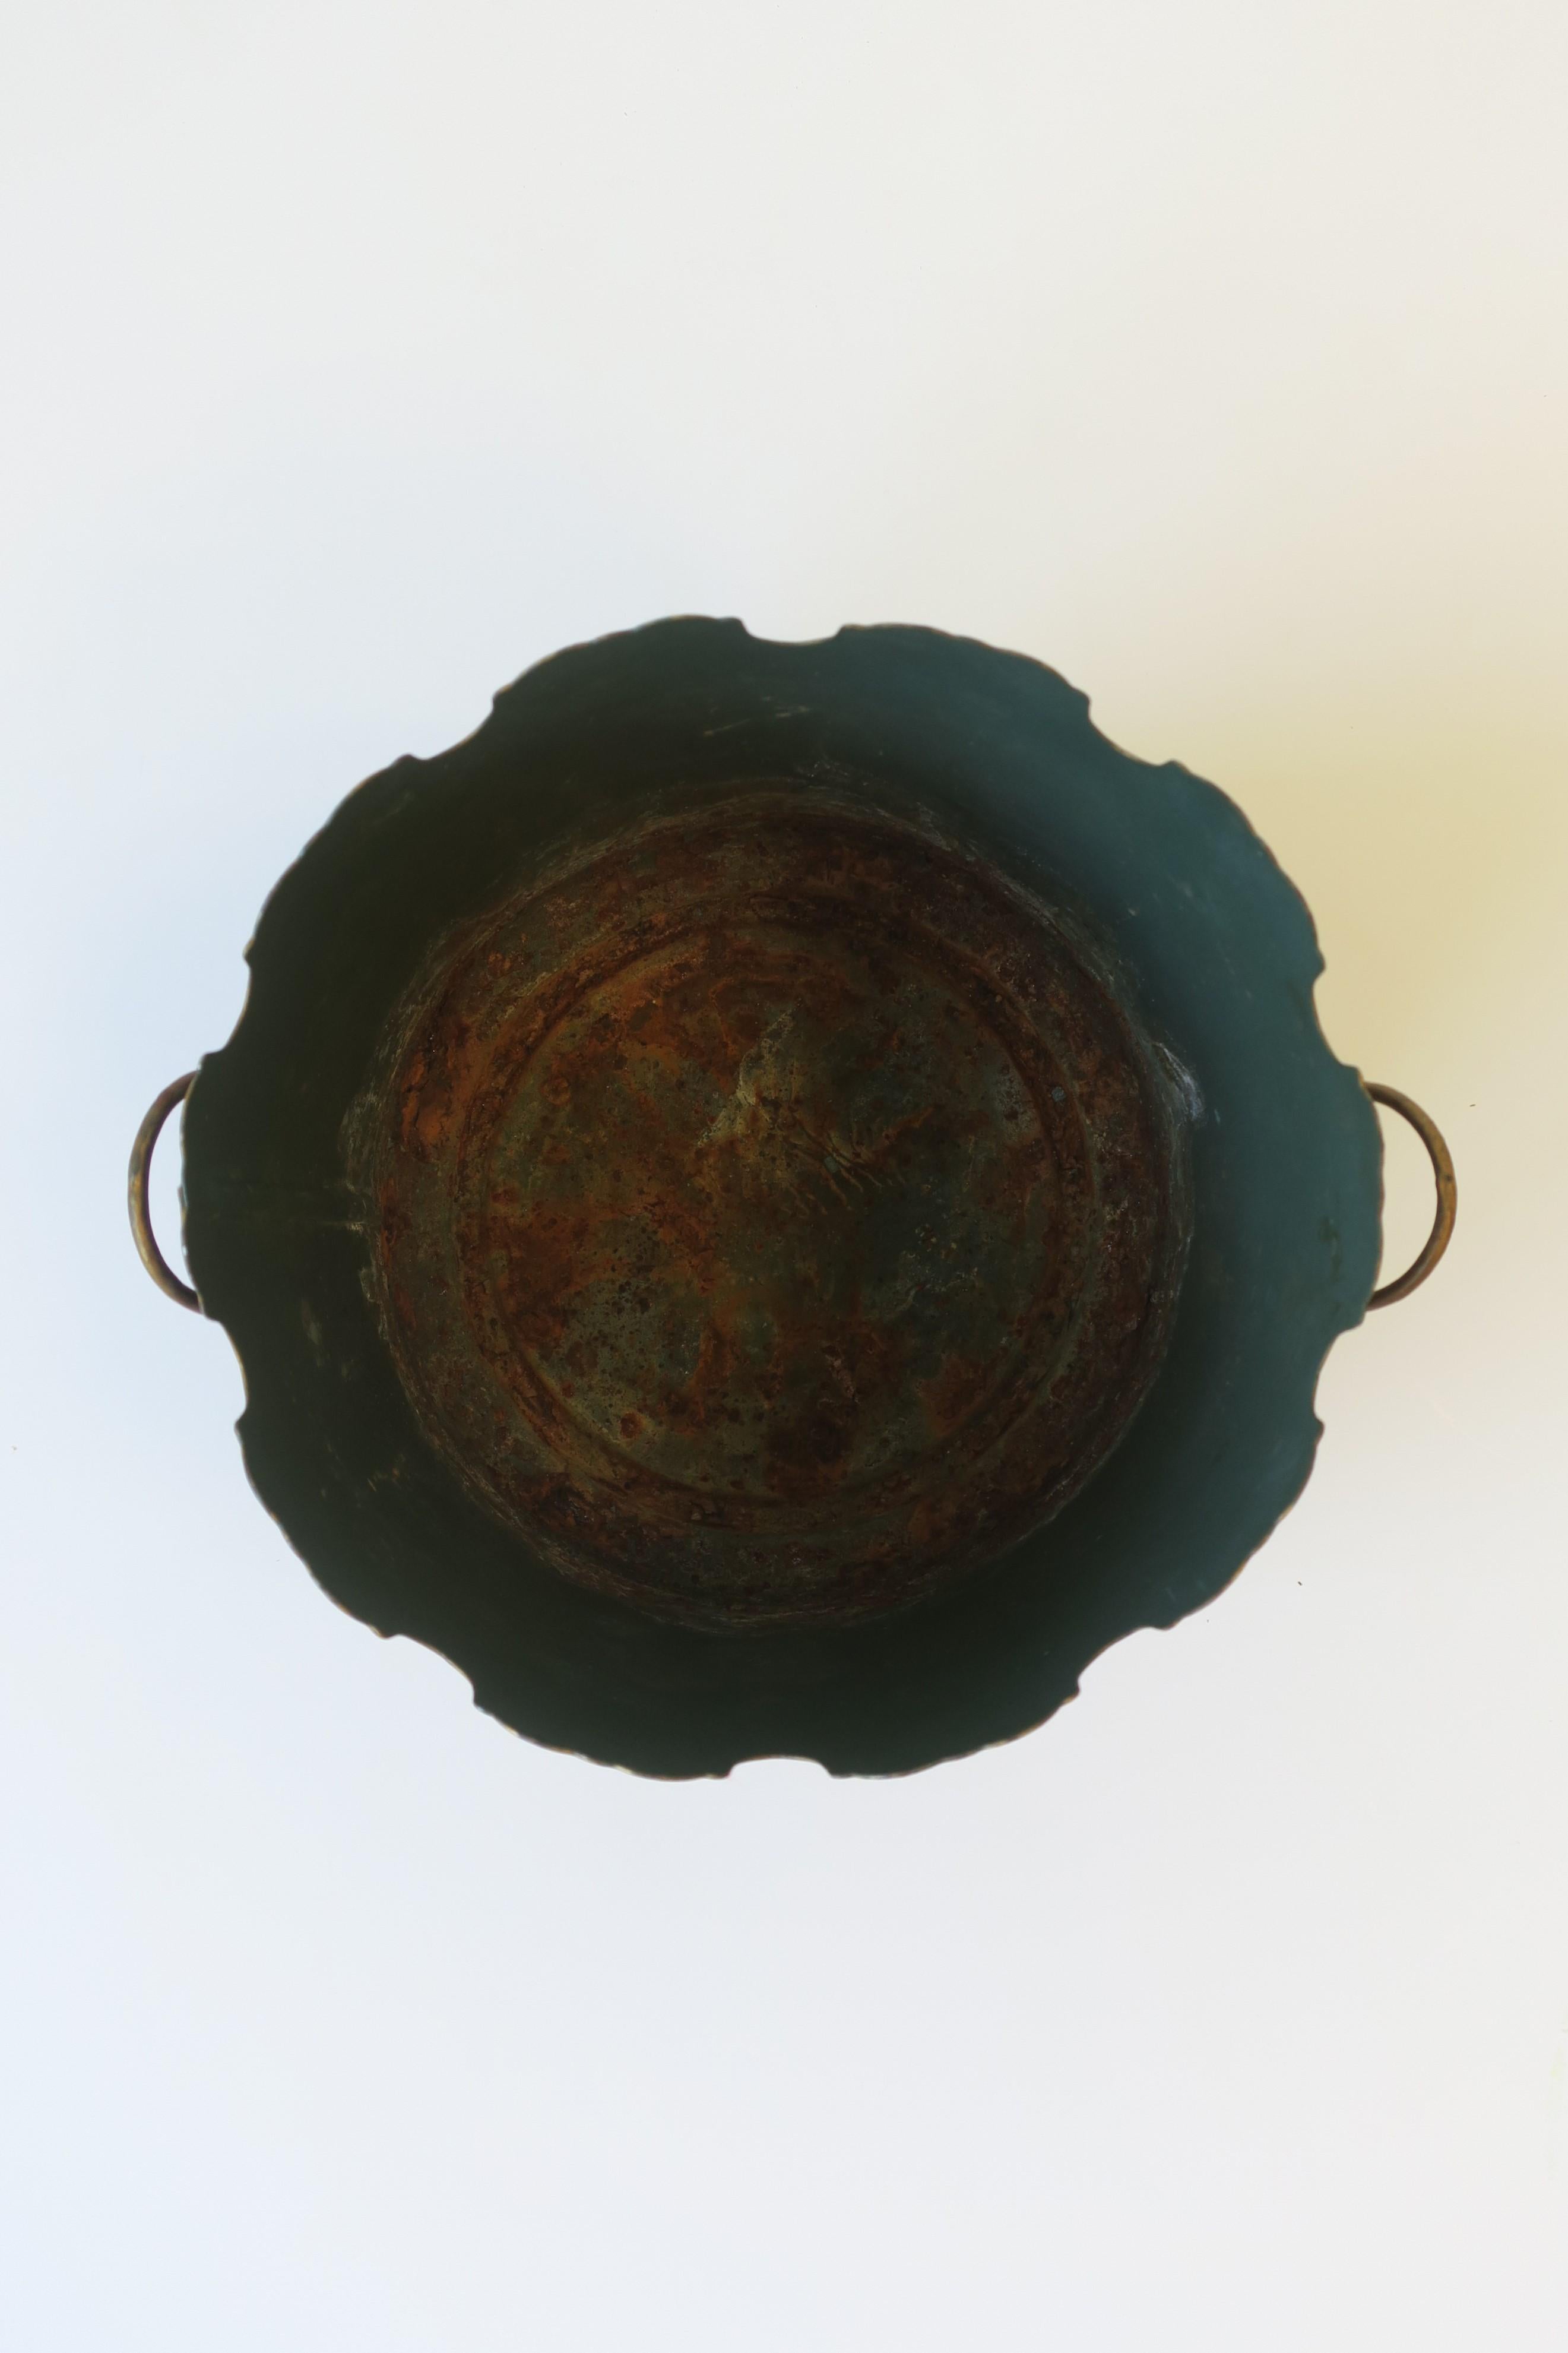 French Tôle Green & Gold Jardinière Cachepot with Scalloped Edge, 20th c France For Sale 6